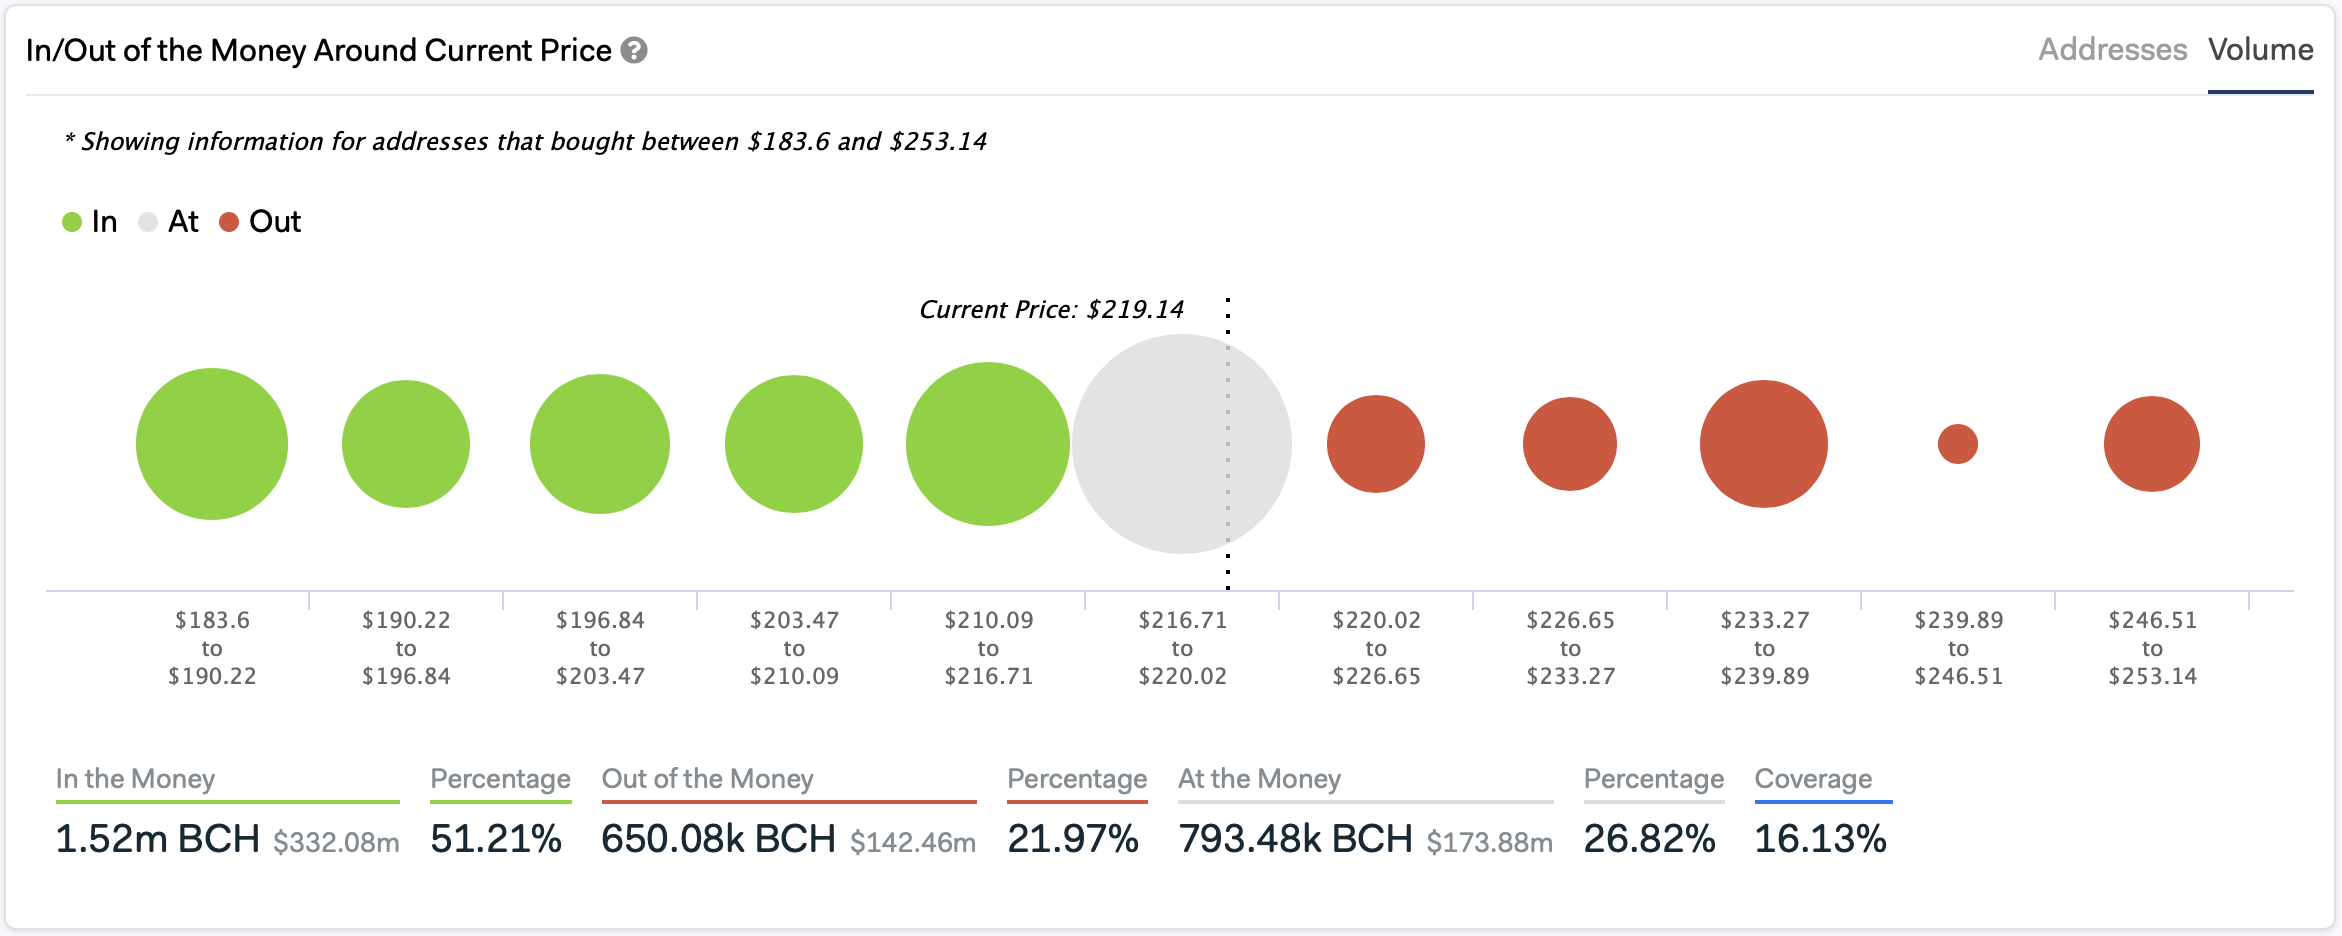 In/Out of the Money Around Current Price by IntoTheBlock